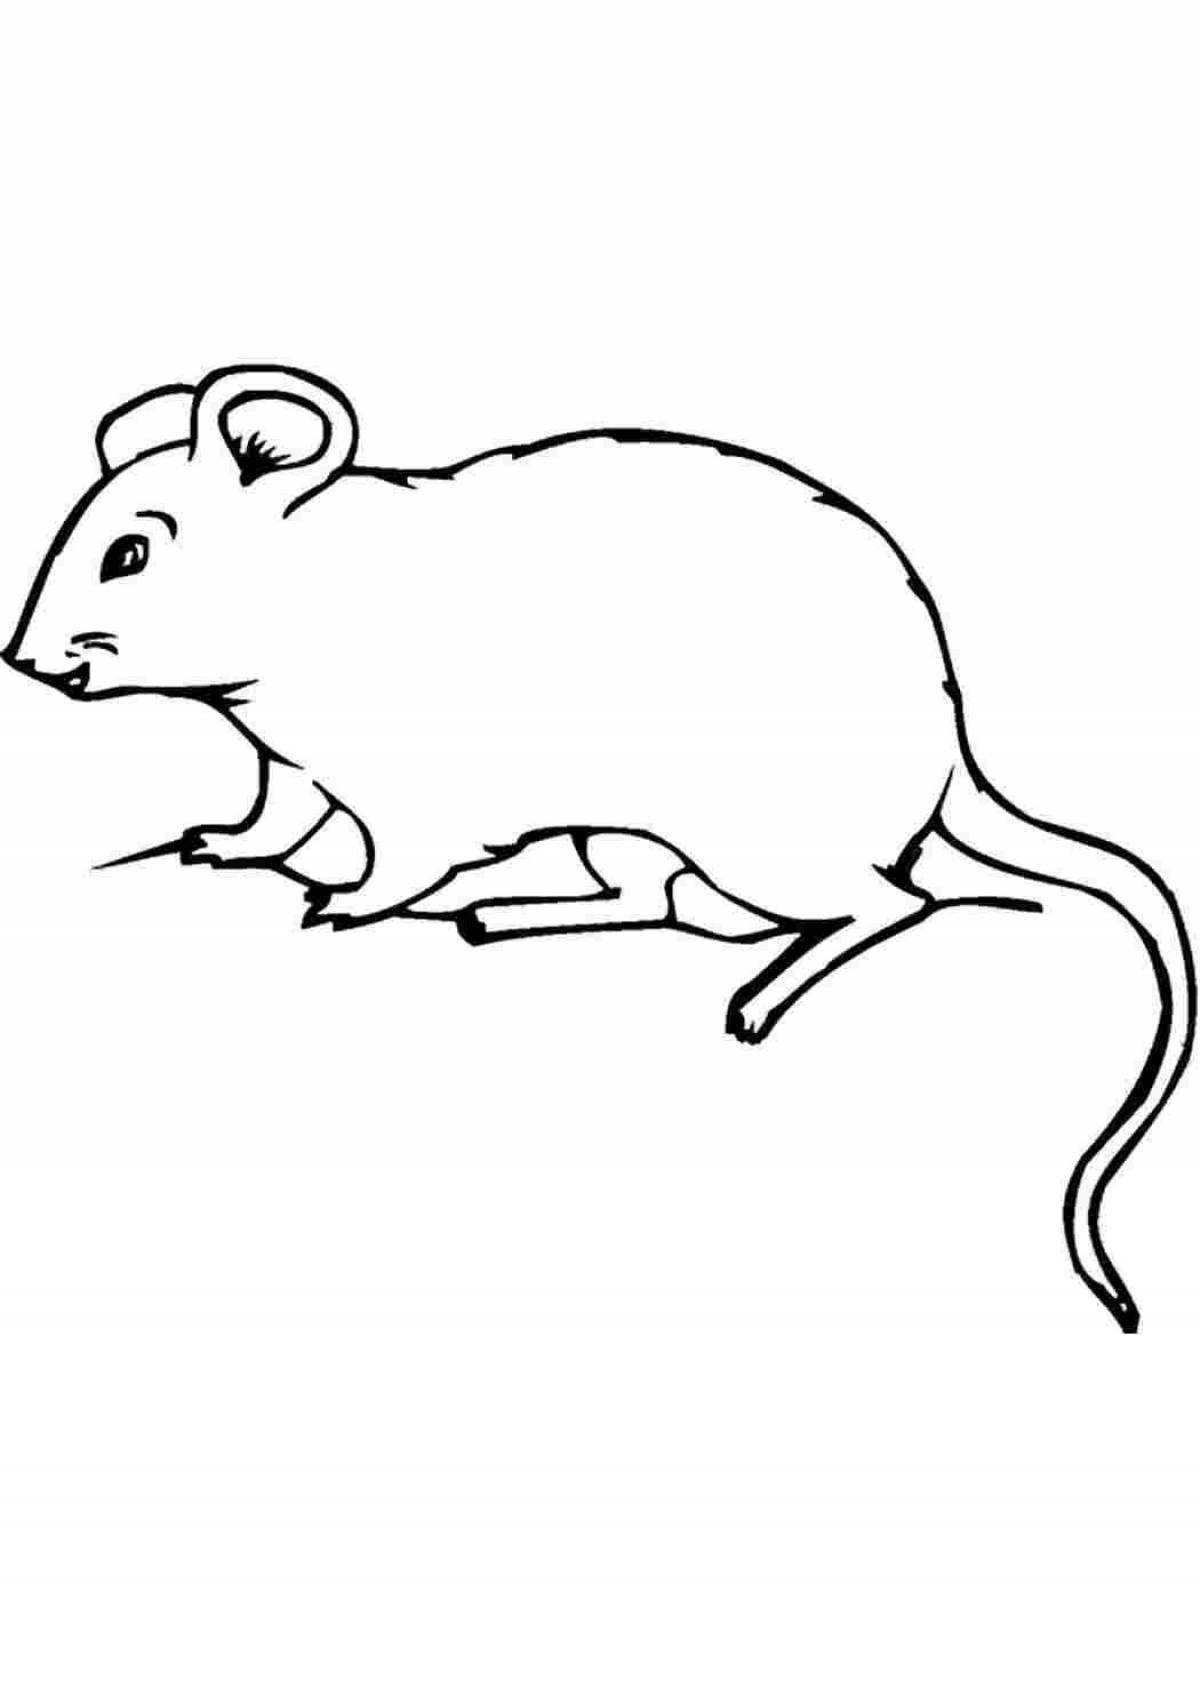 Lariska rat with colored splashes coloring page